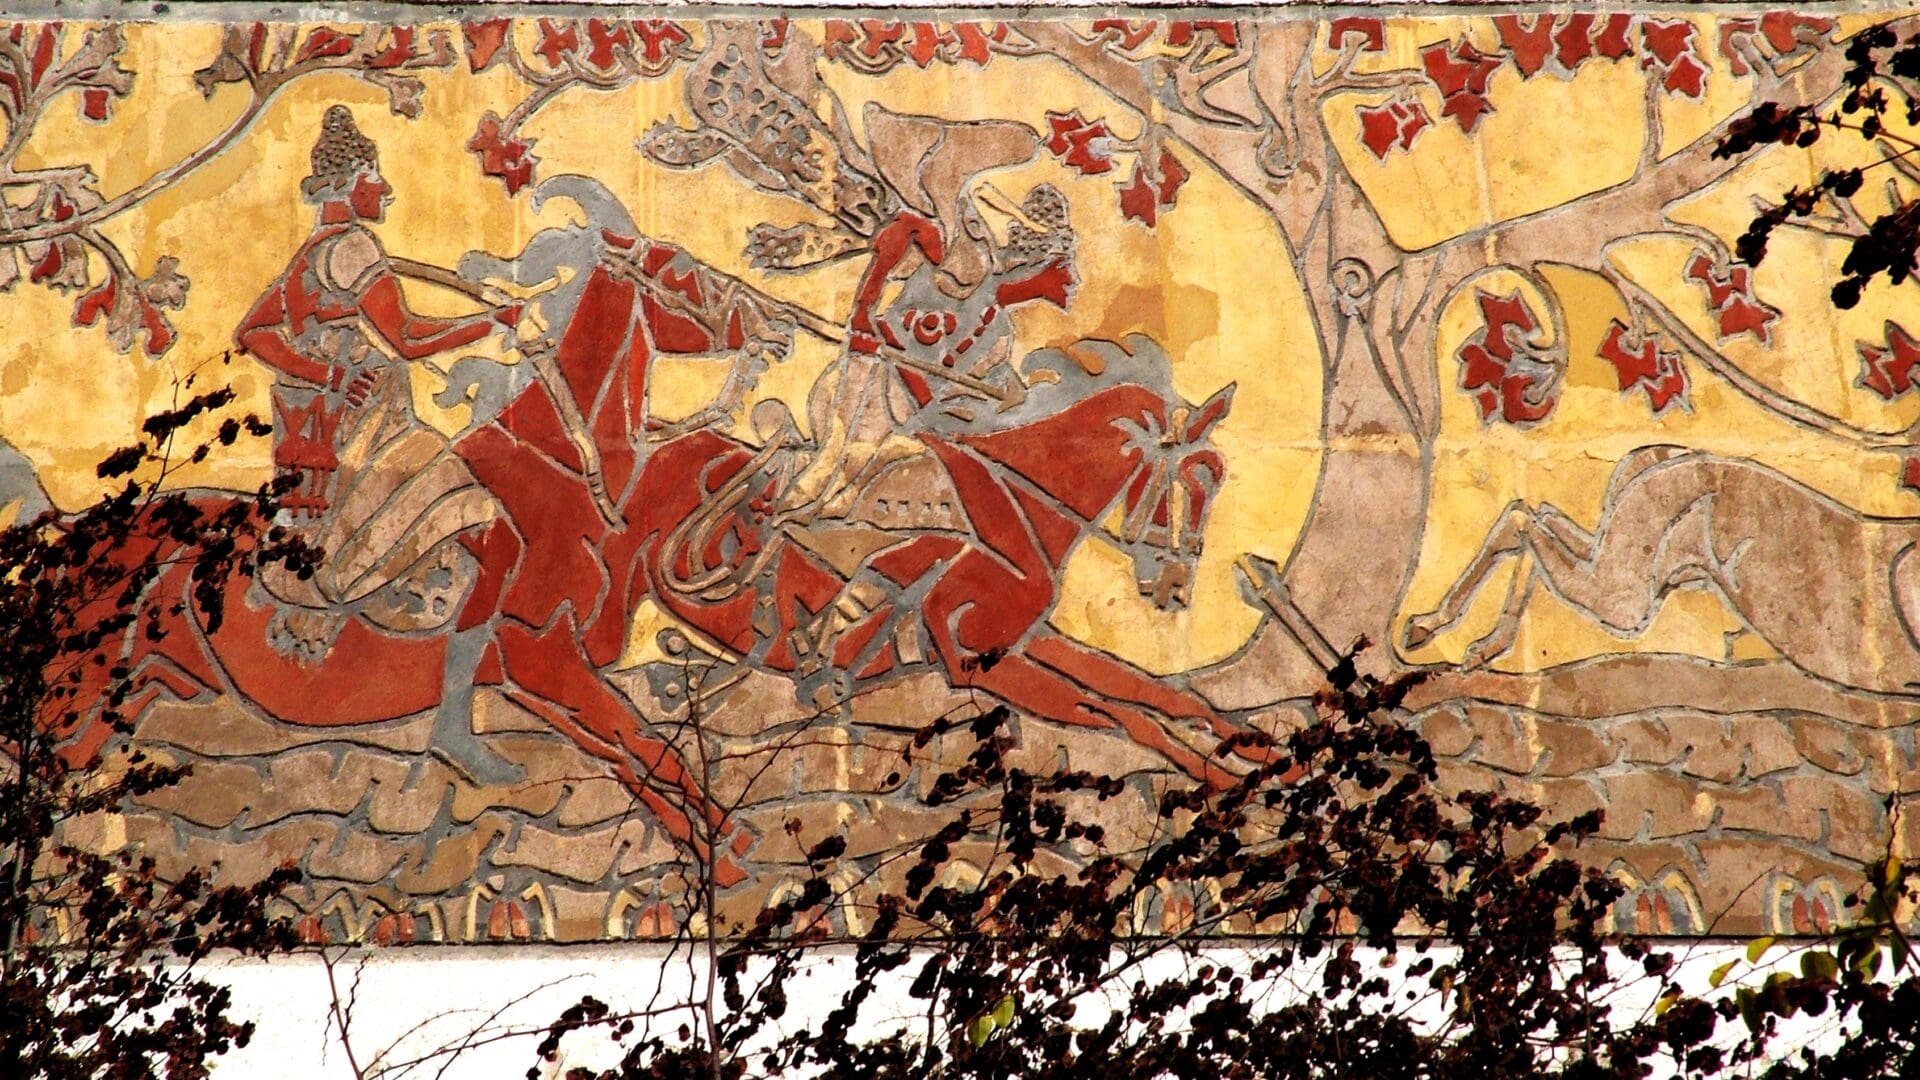 The Chase of the Wondrous Stag, a mural by Sándor Nagy (1909) on the façade of the Veszprém Petőfi theatre.